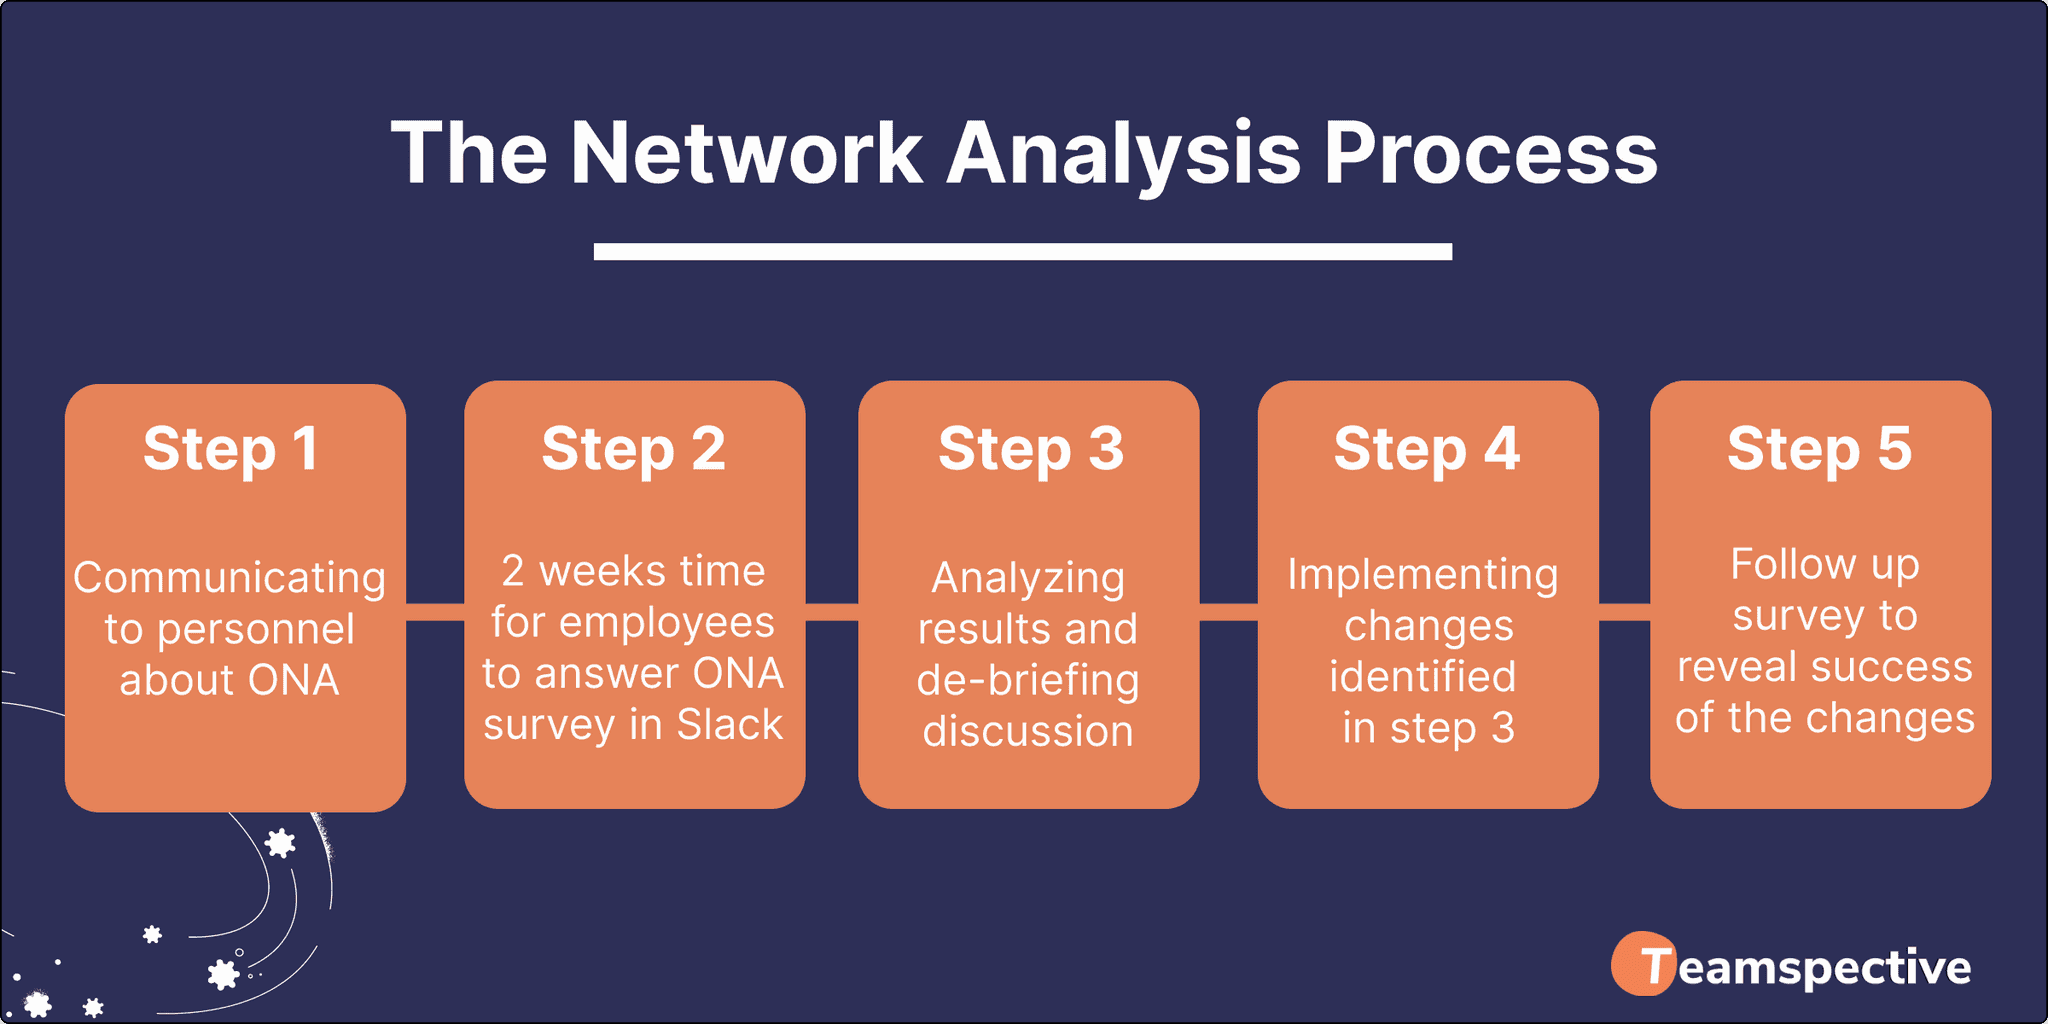 The network analysis process